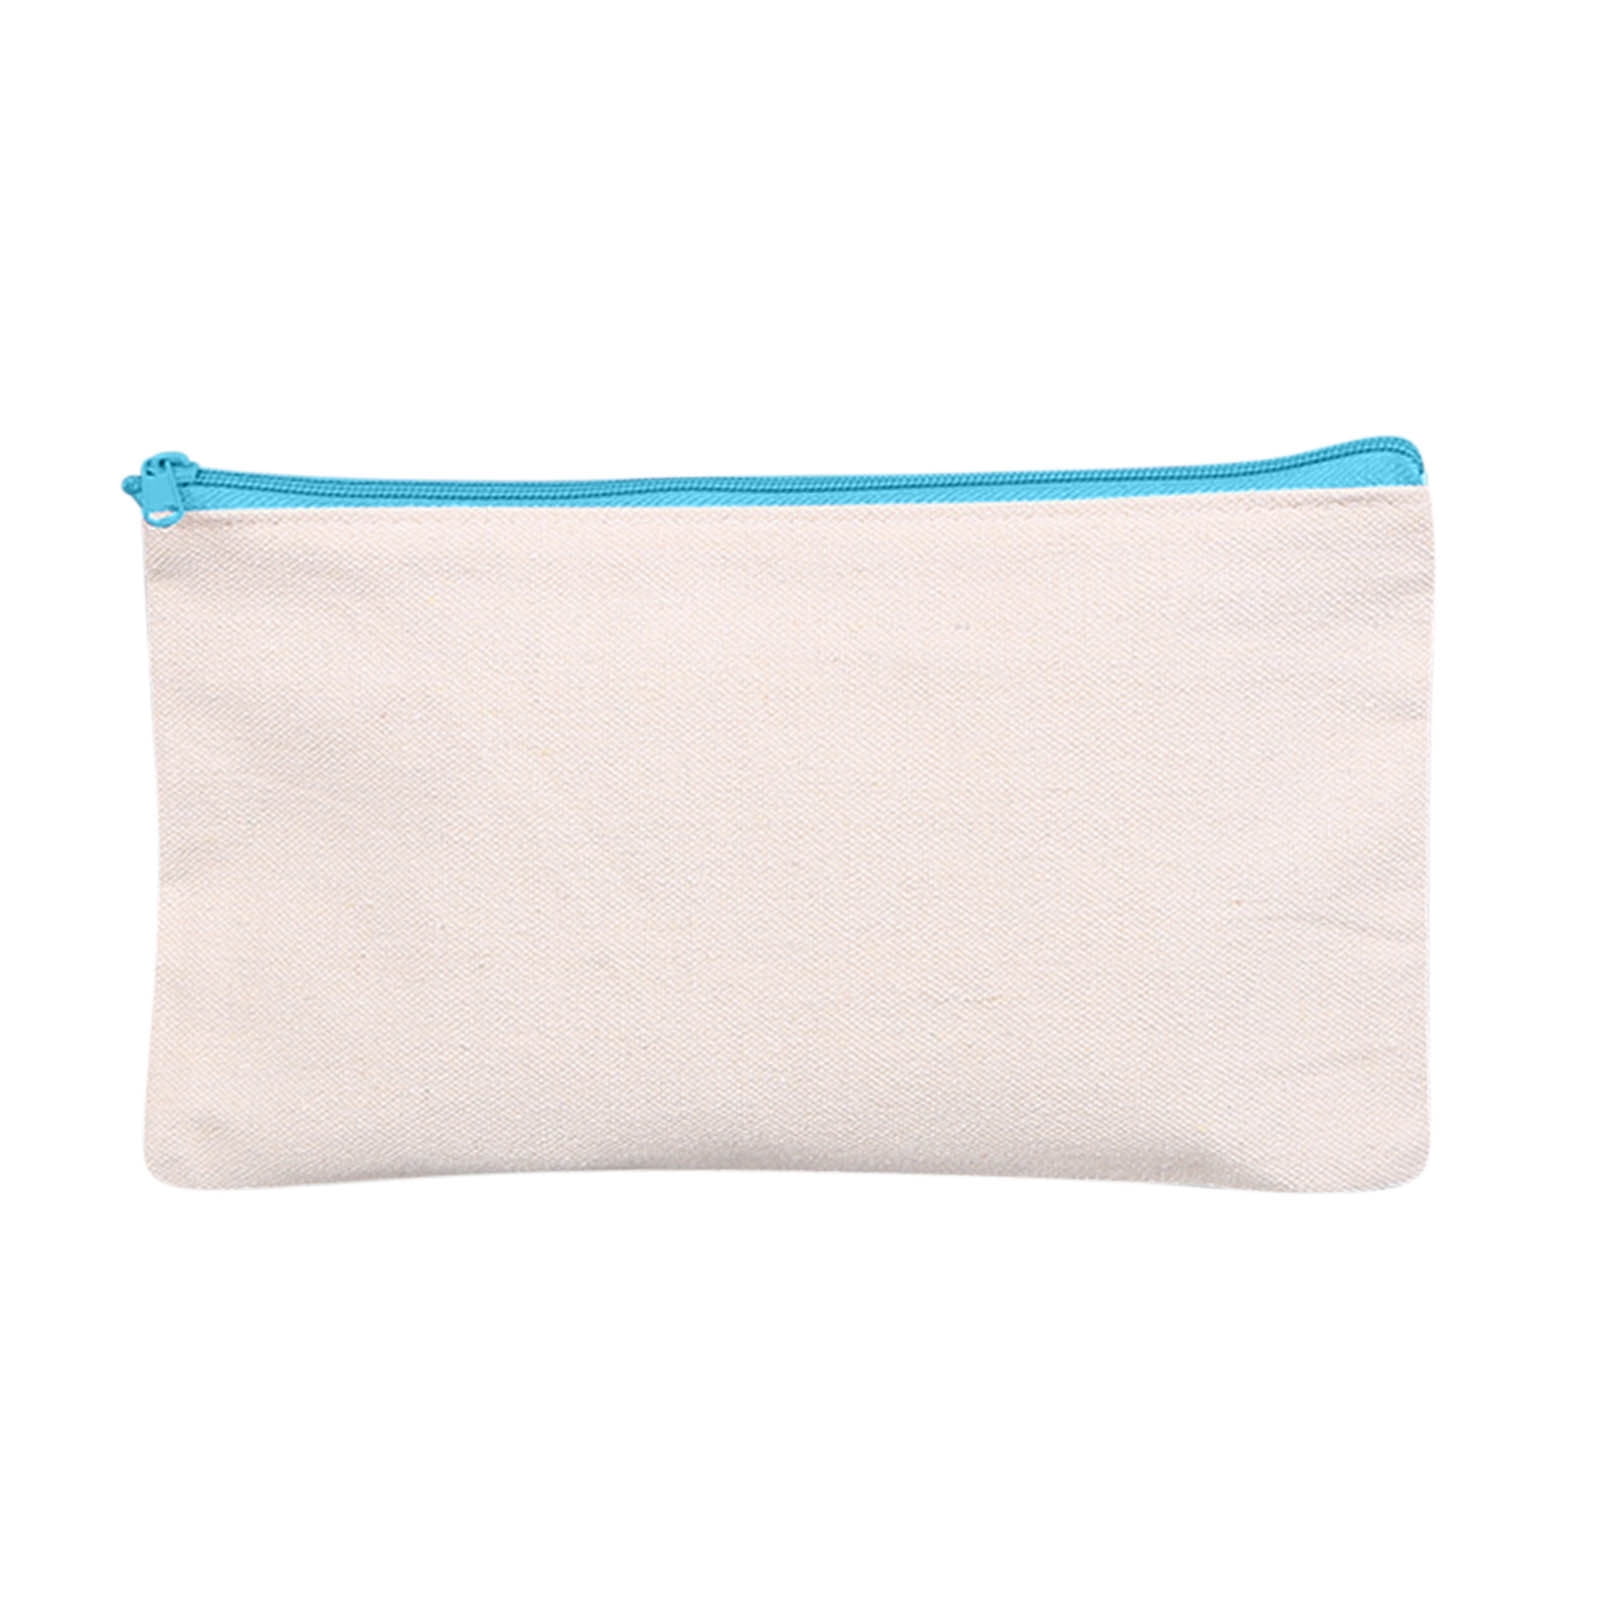 DIY Print: Blank Cotton Canvas Blank Makeup Bags With Gold Zip And Lining  12oz Capacity, Available From Addisonpong, $2.18